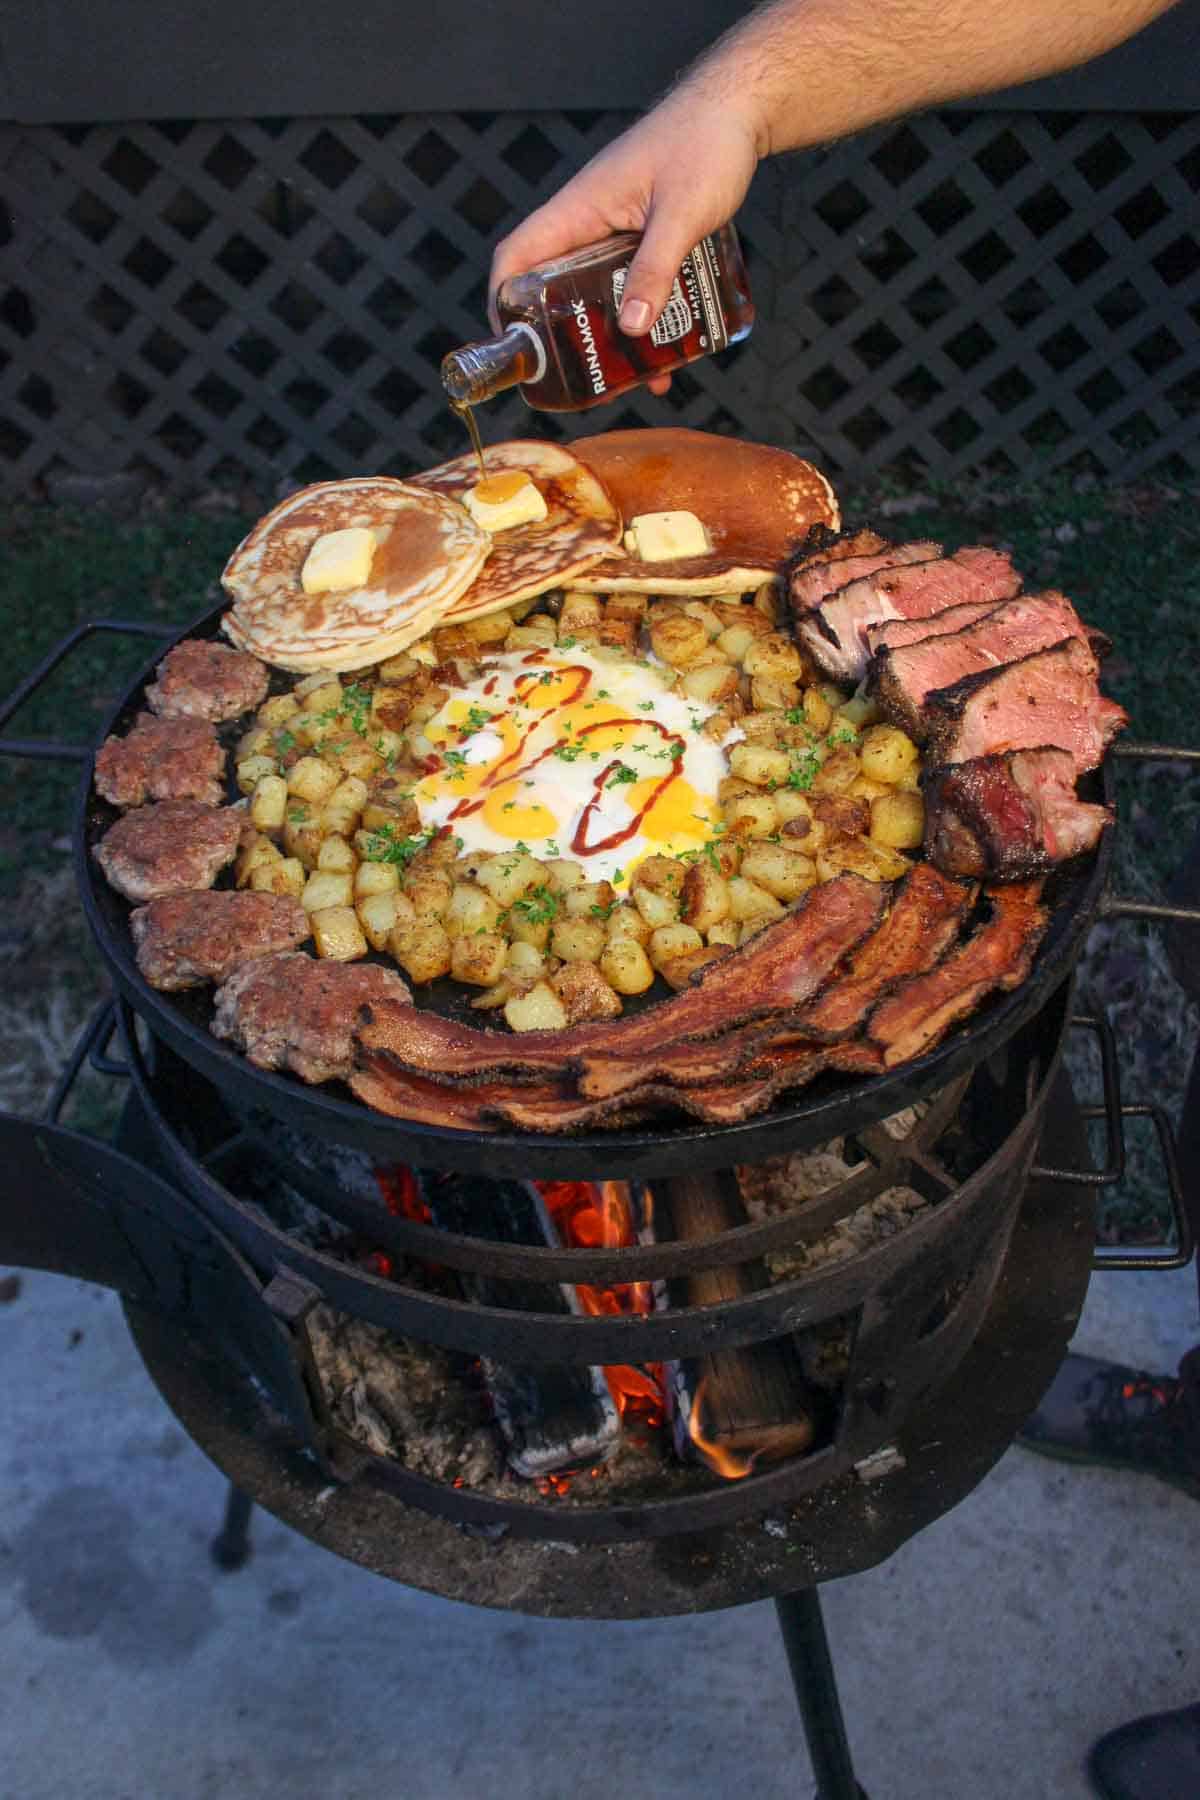 The ultimate Country Breakfast Skillet comes together on the grill with bacon, country sausage, crispy potatoes, fried eggs, pancakes, and sliced ribeye steak! 